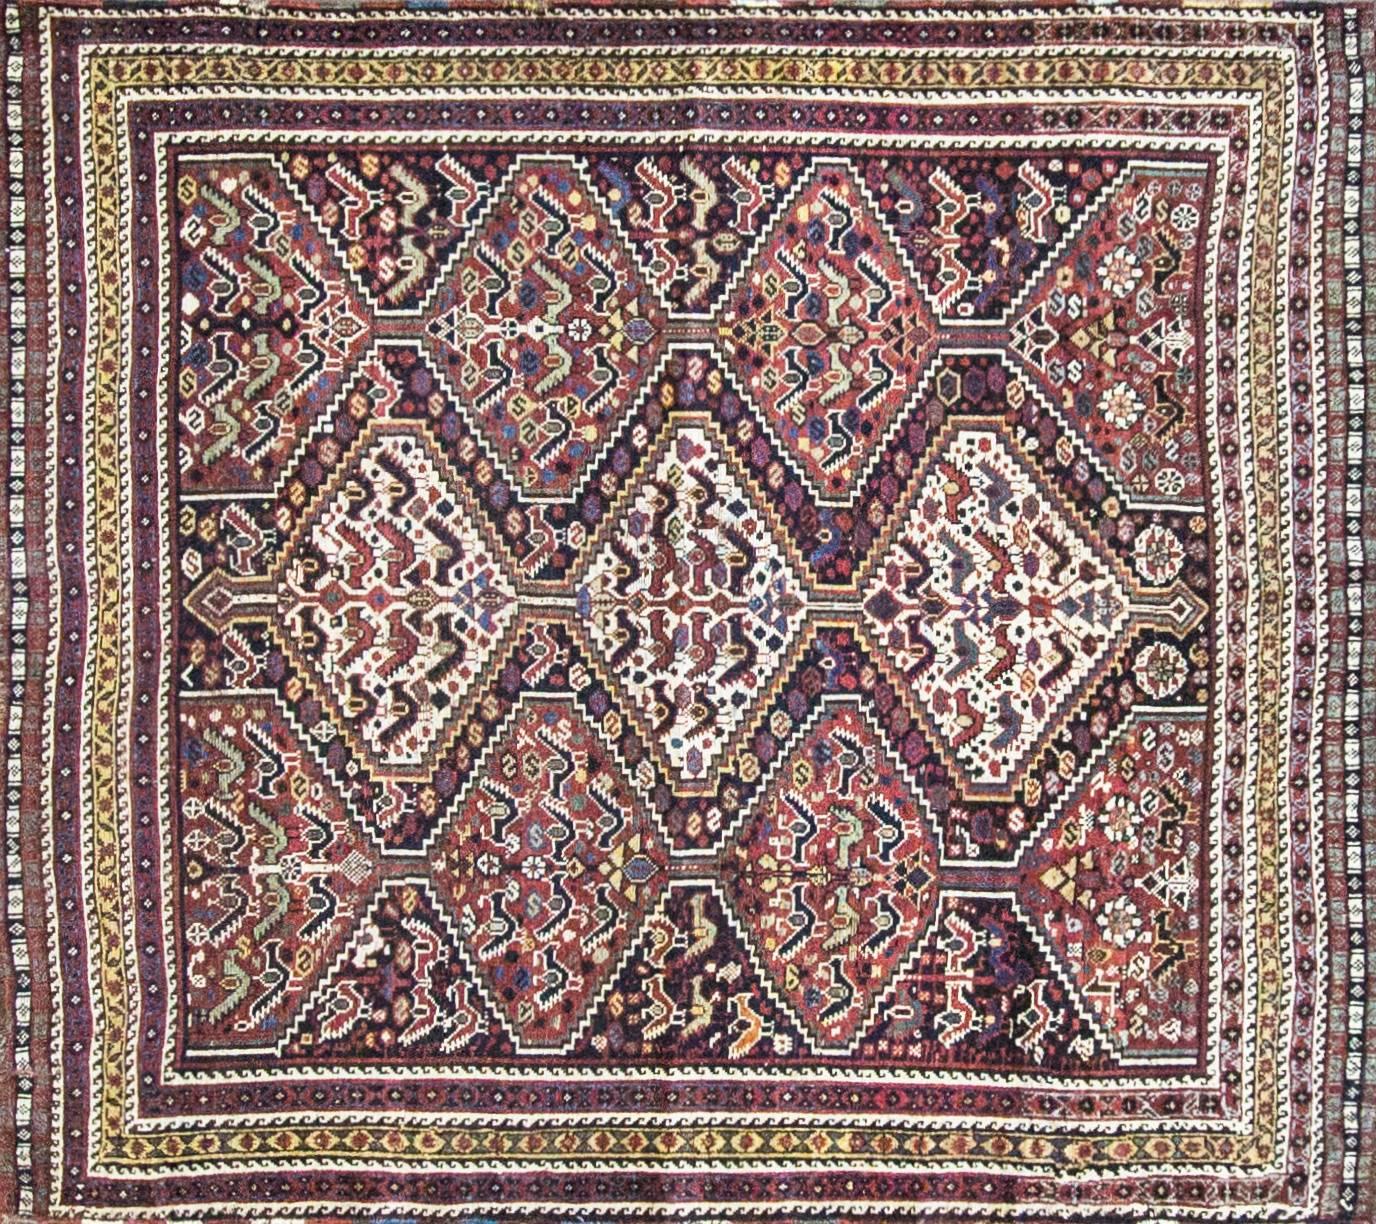 Antique Persian Qashgai tribal birds rug, wool pile over wool foundation, natural colors and dyes.
The Qashgai nomads are found in the Fars province in the southwest of Iran. They move twice a year, between the winter pasture near the Persian Gulf